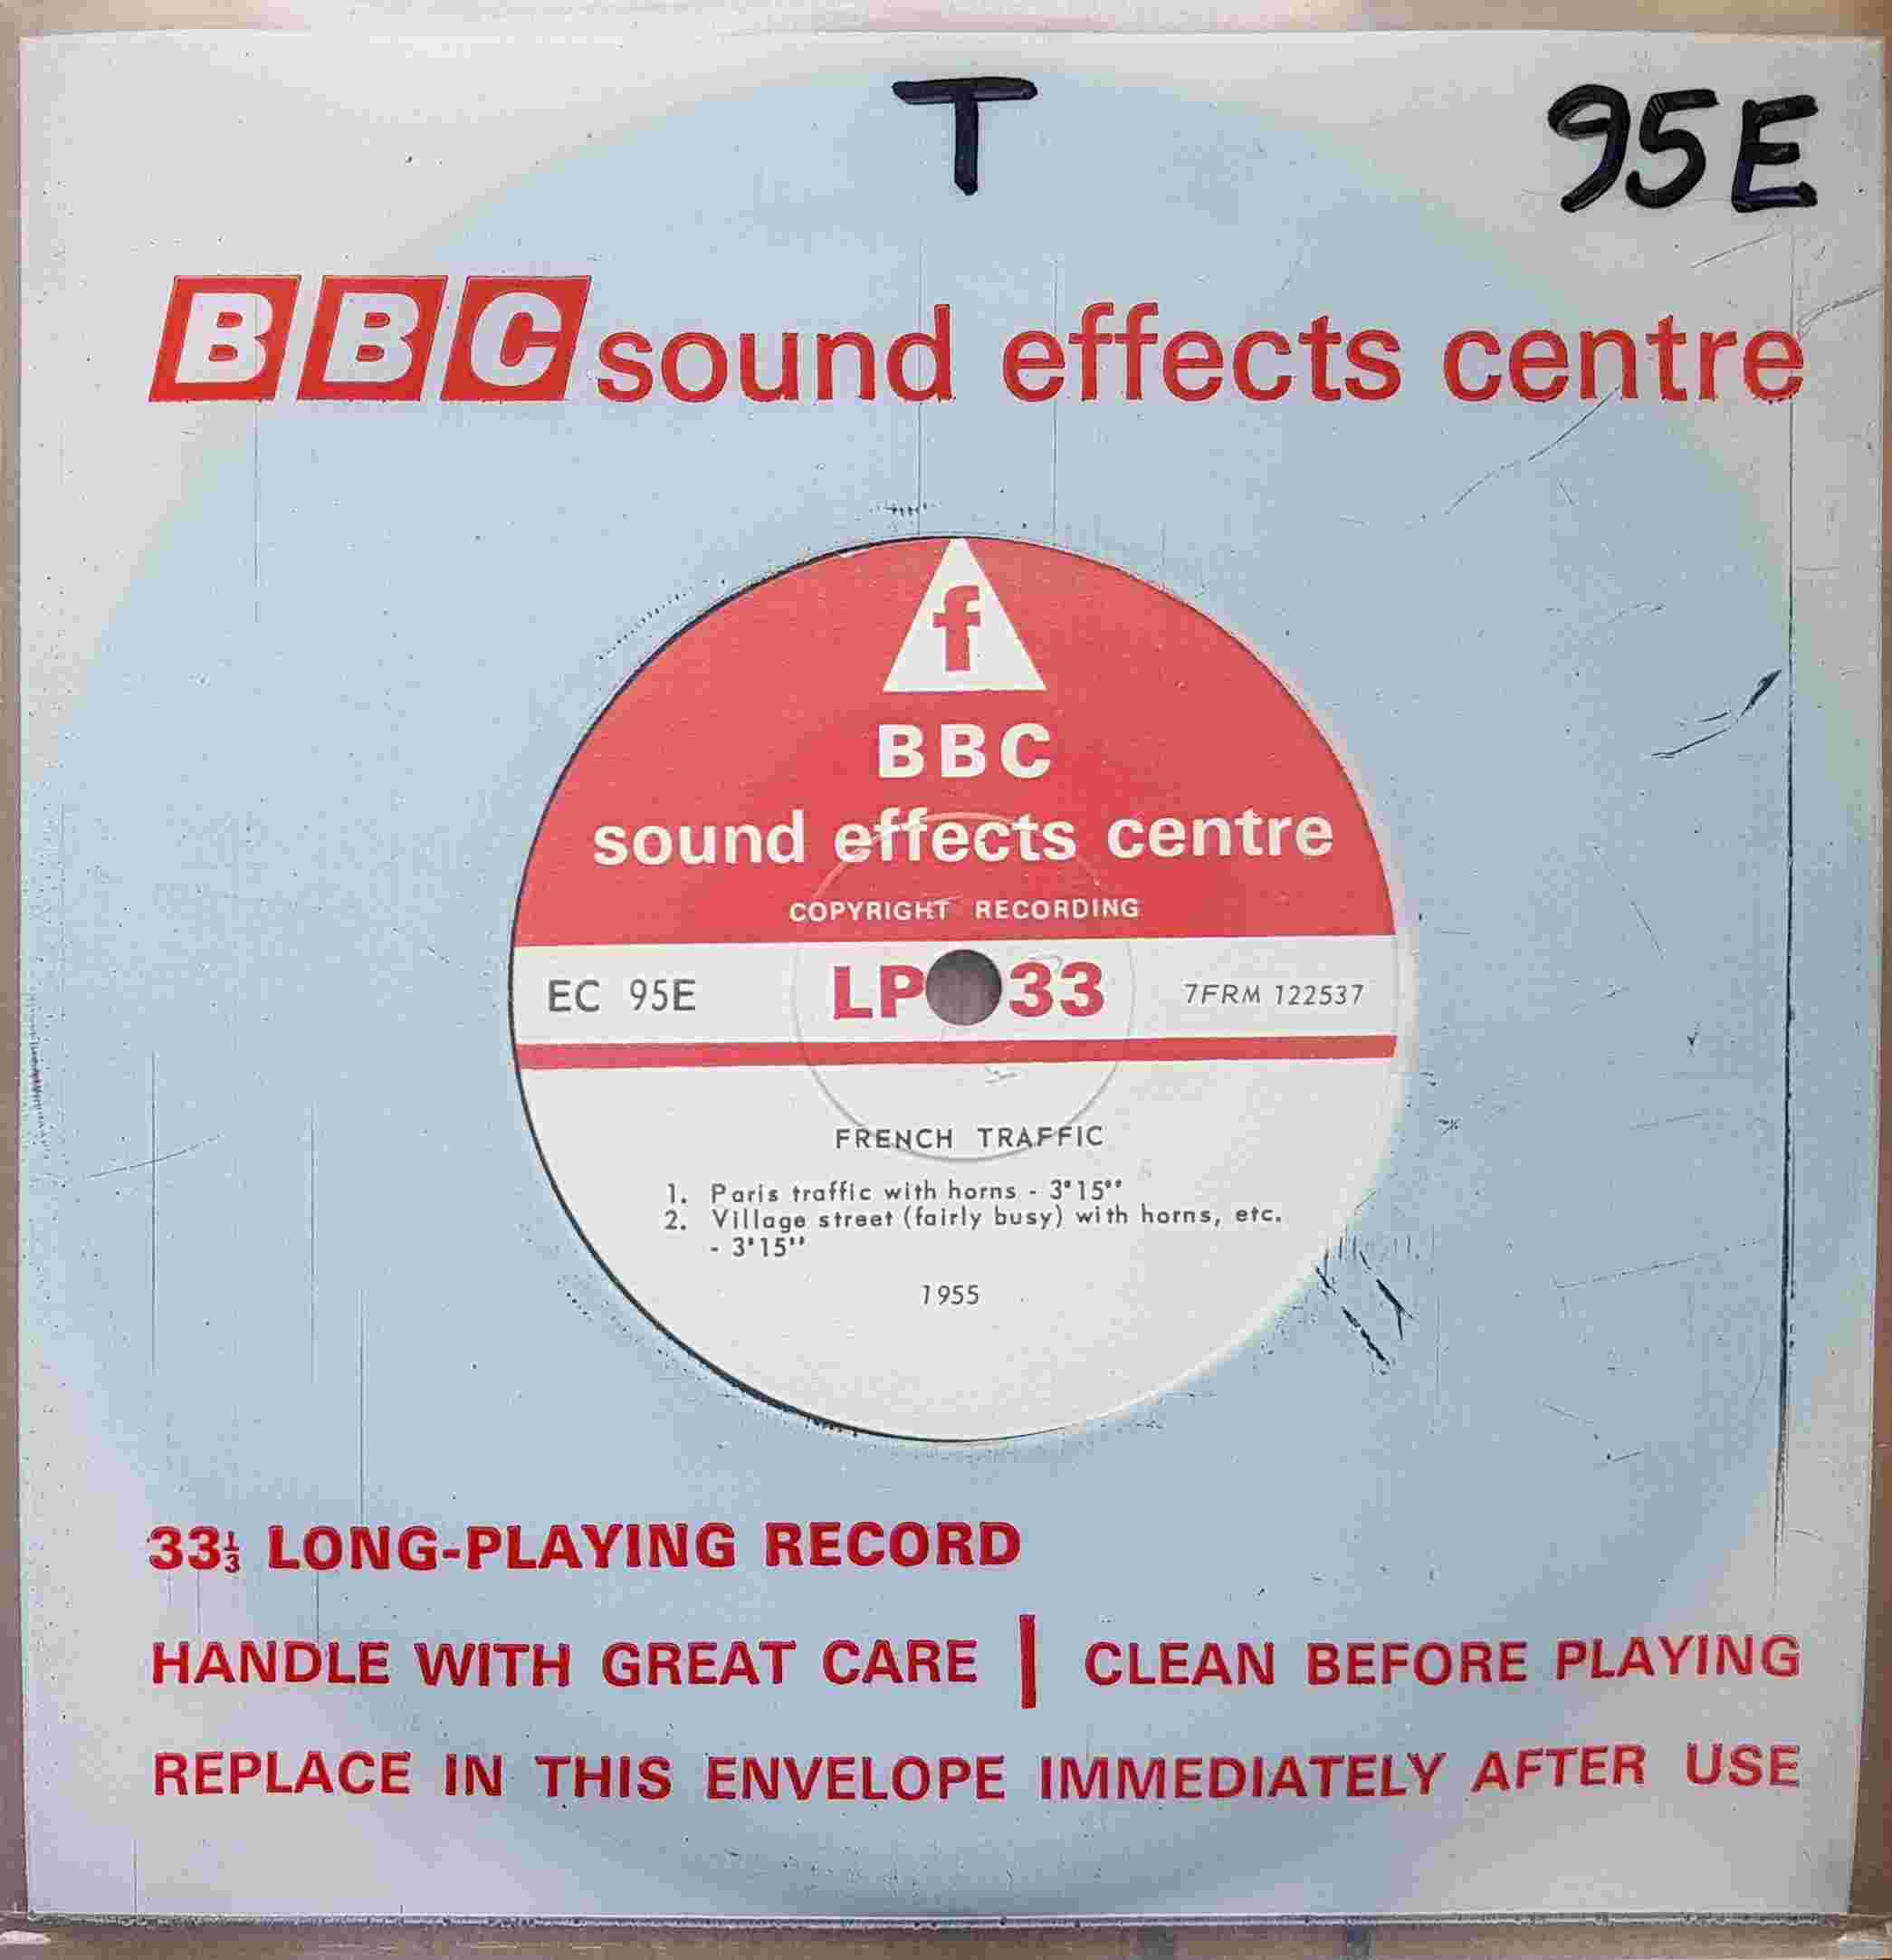 Picture of EC 95E French traffic by artist Not registered from the BBC singles - Records and Tapes library